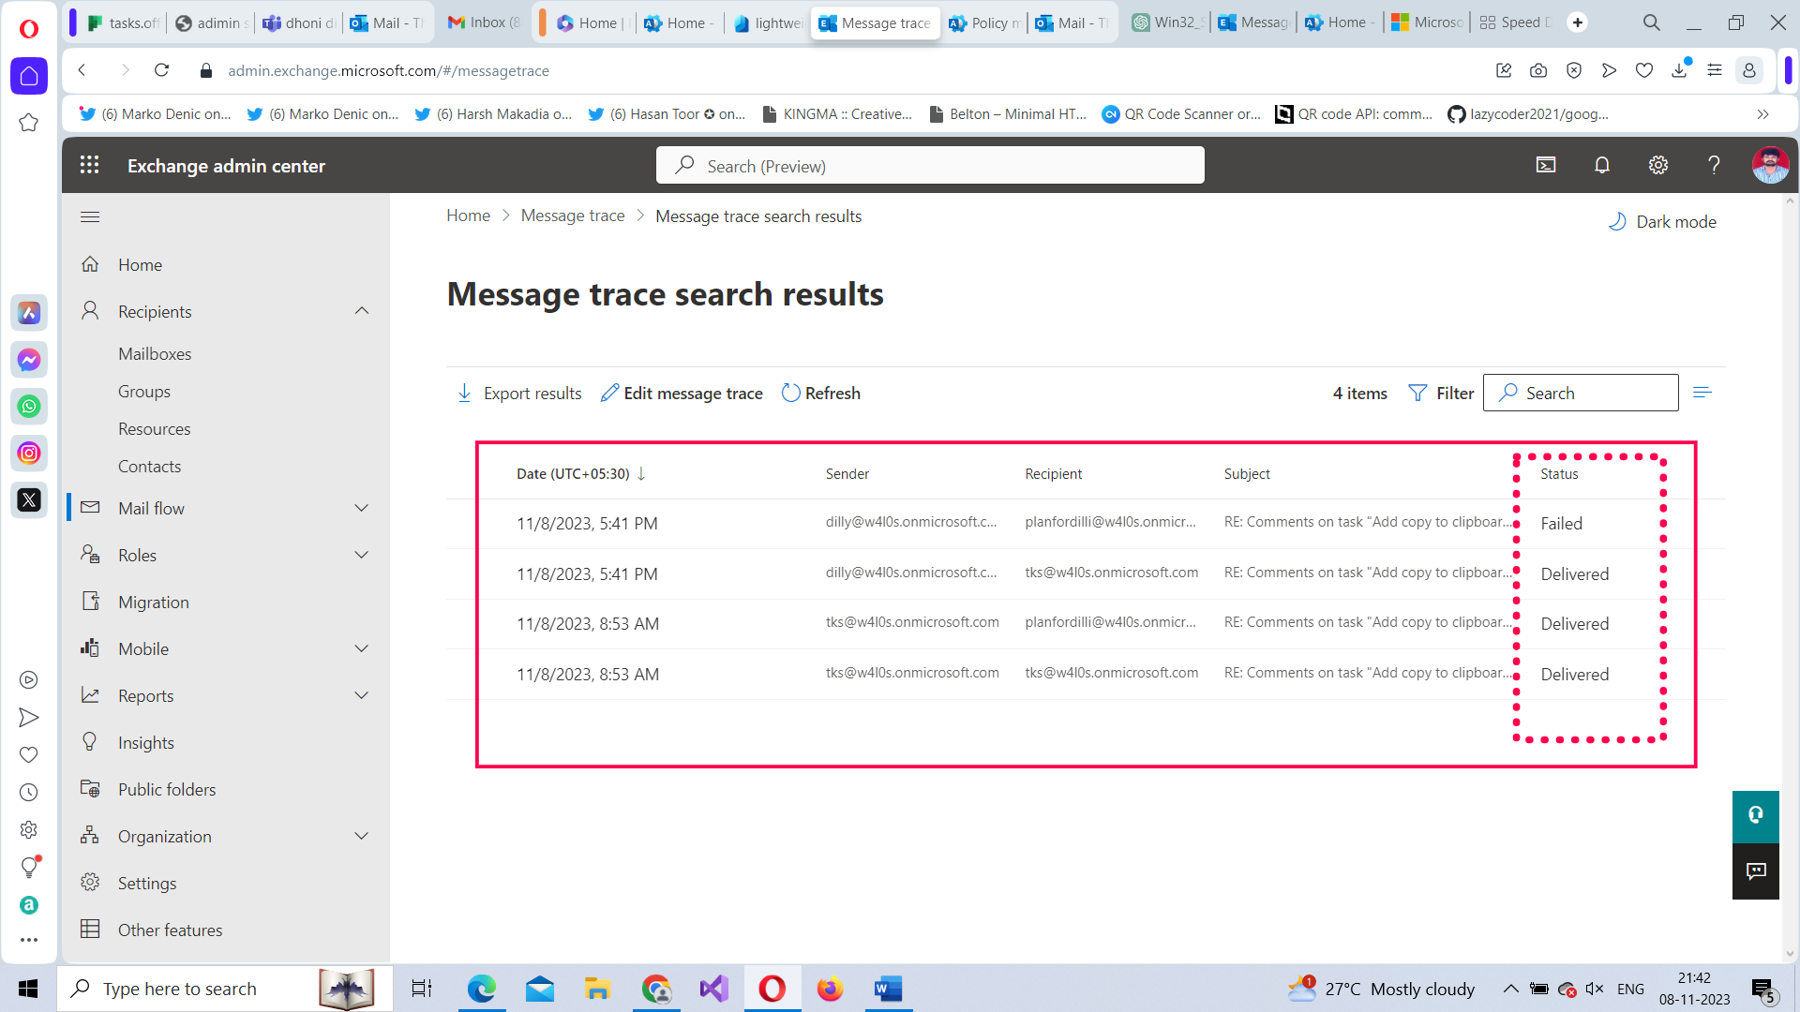 Message trace search results being displayed.